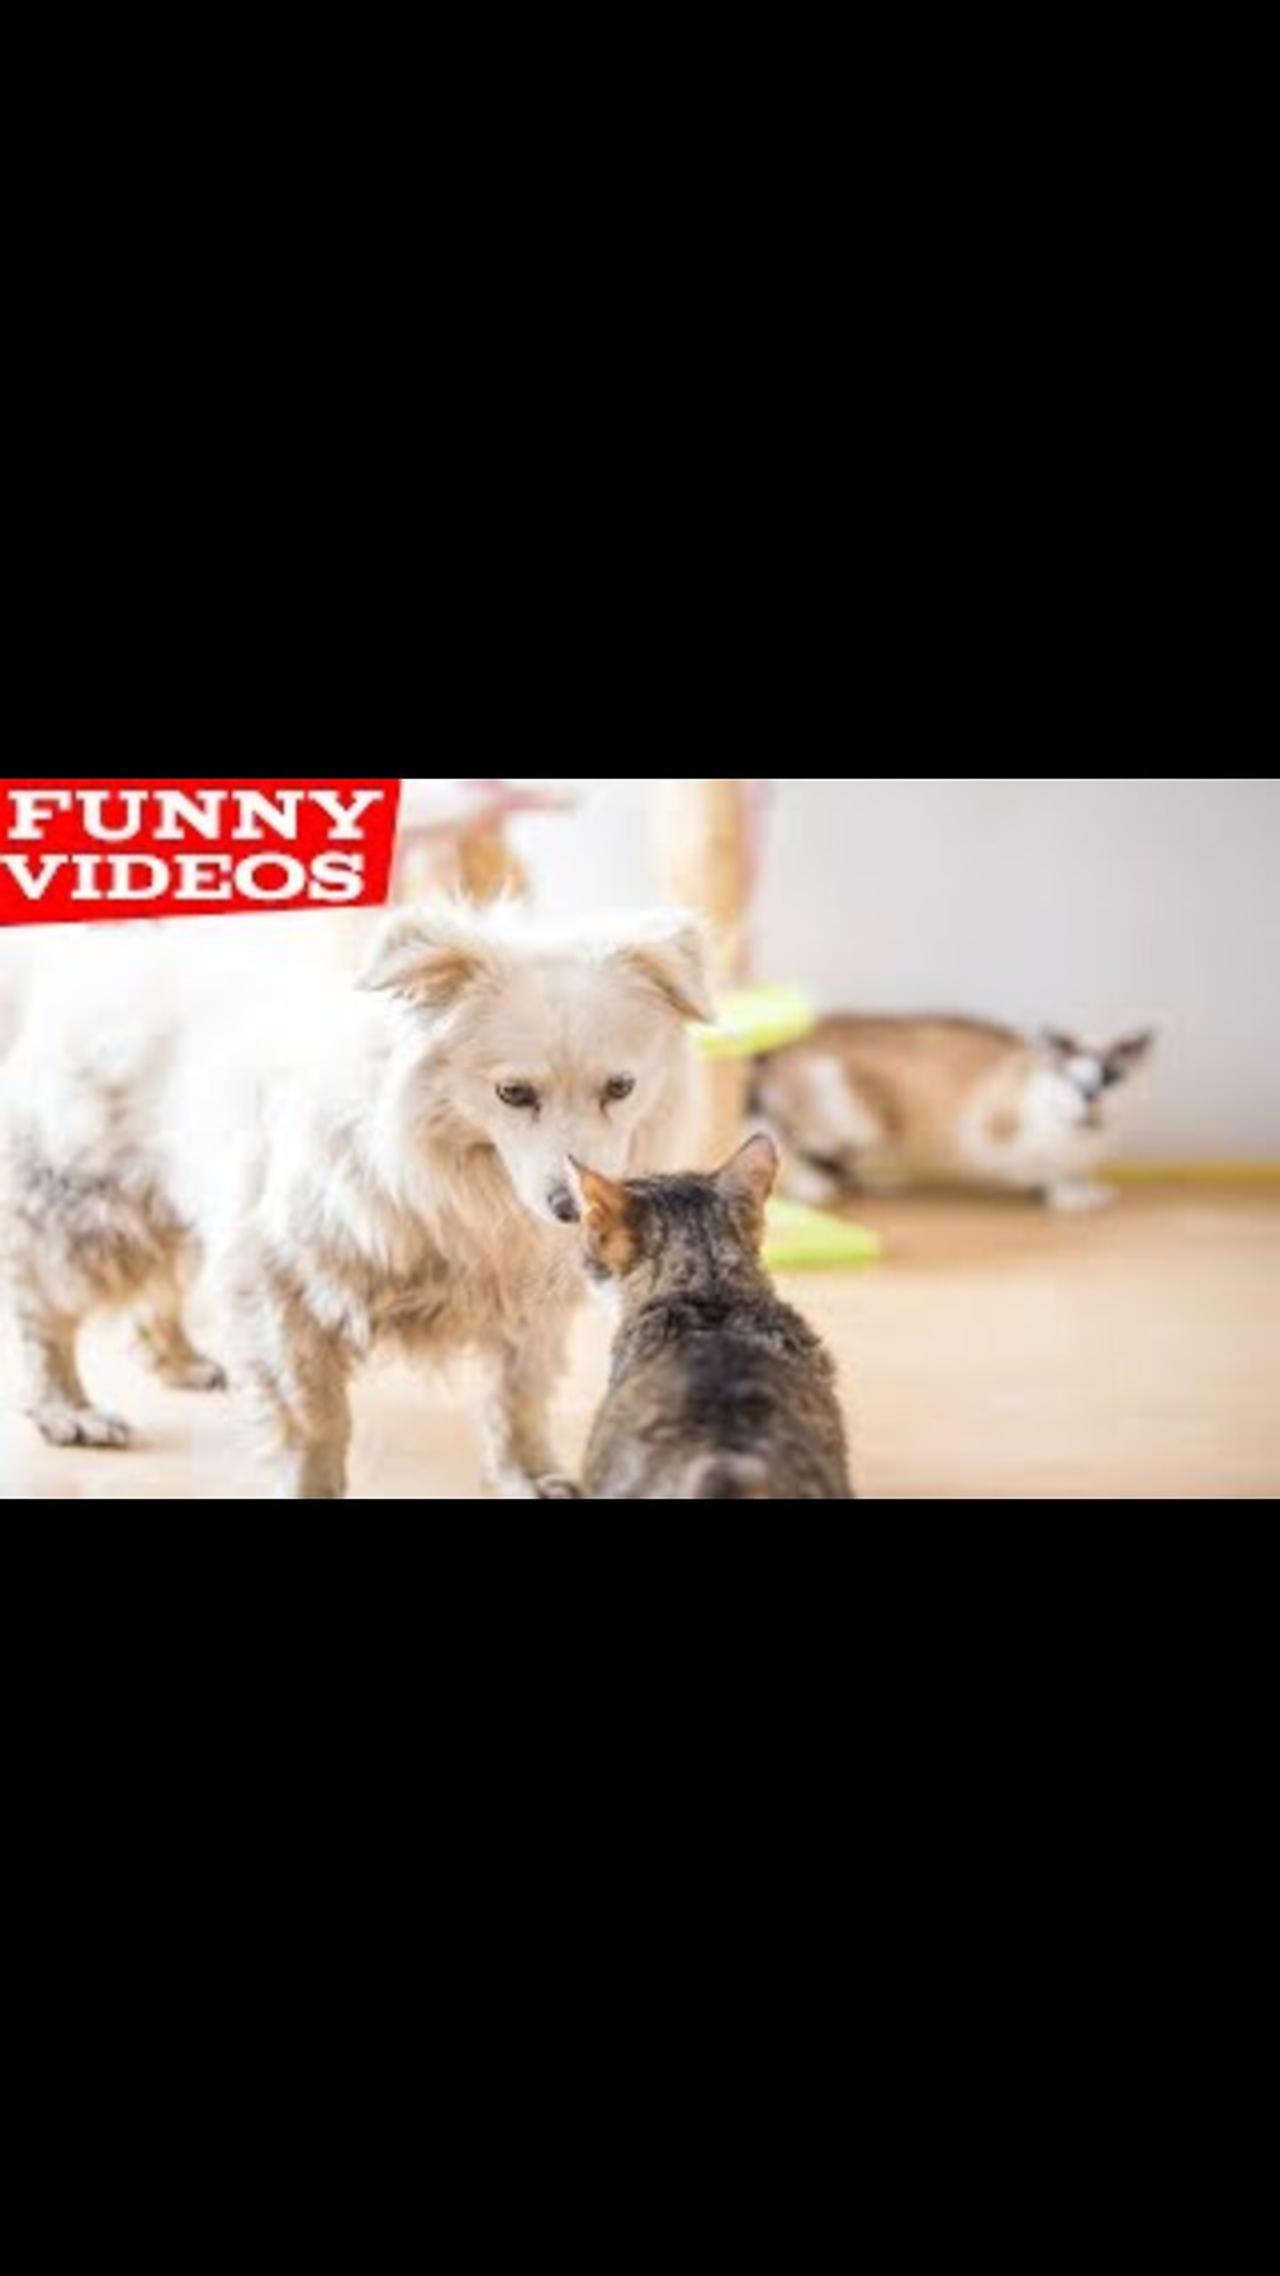 Best Funny Animal Videos of the year (2022), funniest animals ever. relax with cute animals